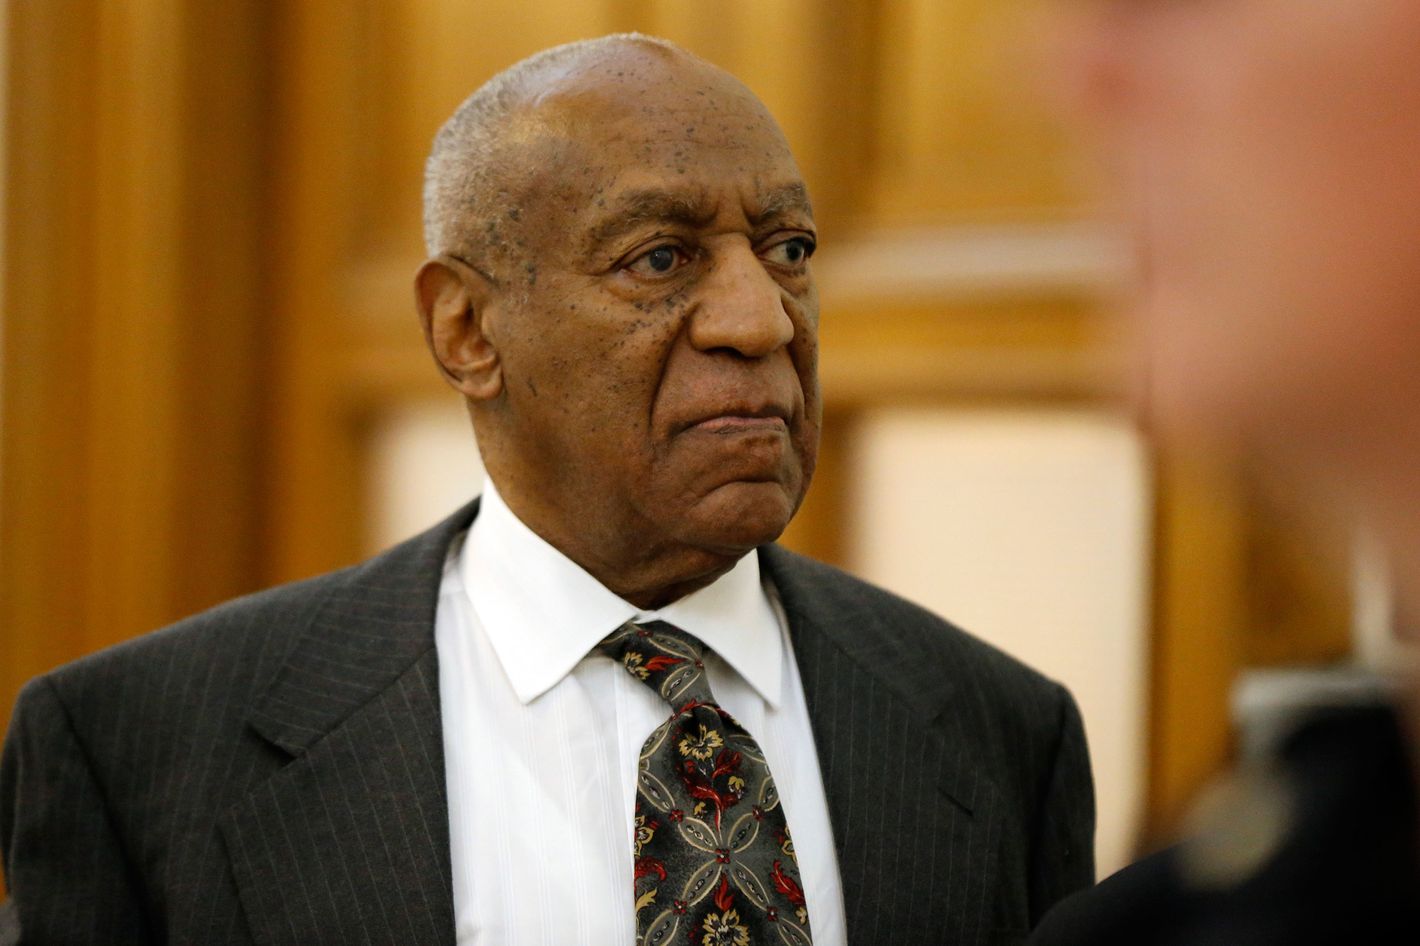 Bill Cosby: Racism Might Have Motivated Assault Accusations